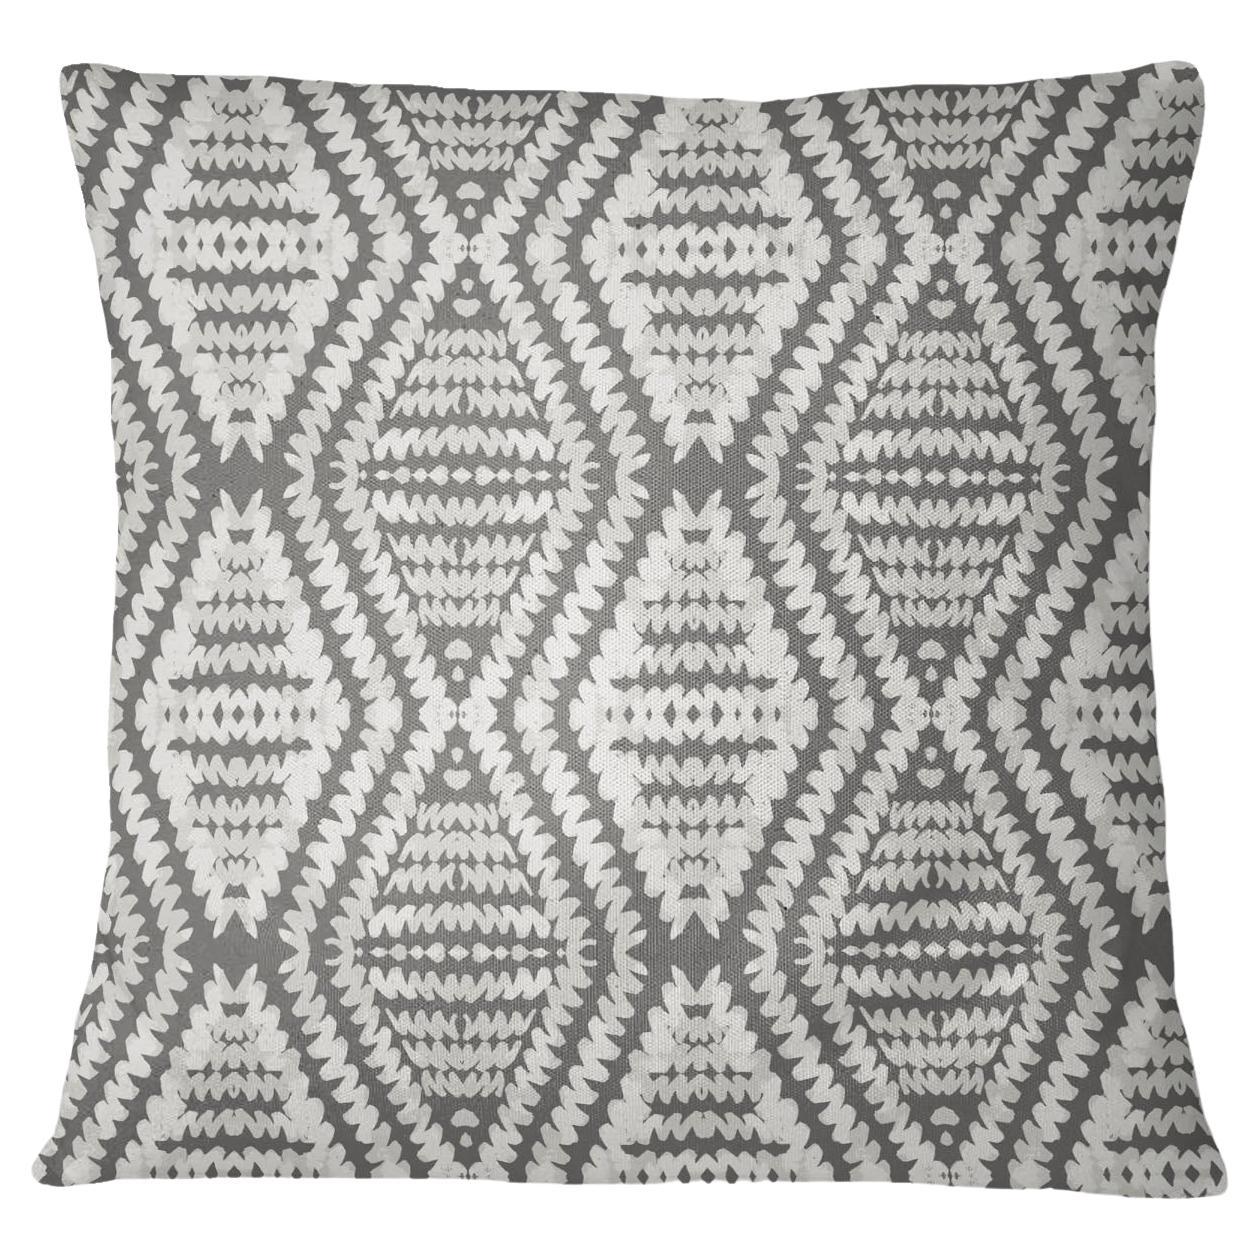 Diamond Wave Polyester Throw Pillows Set of 2 in Cream For Sale